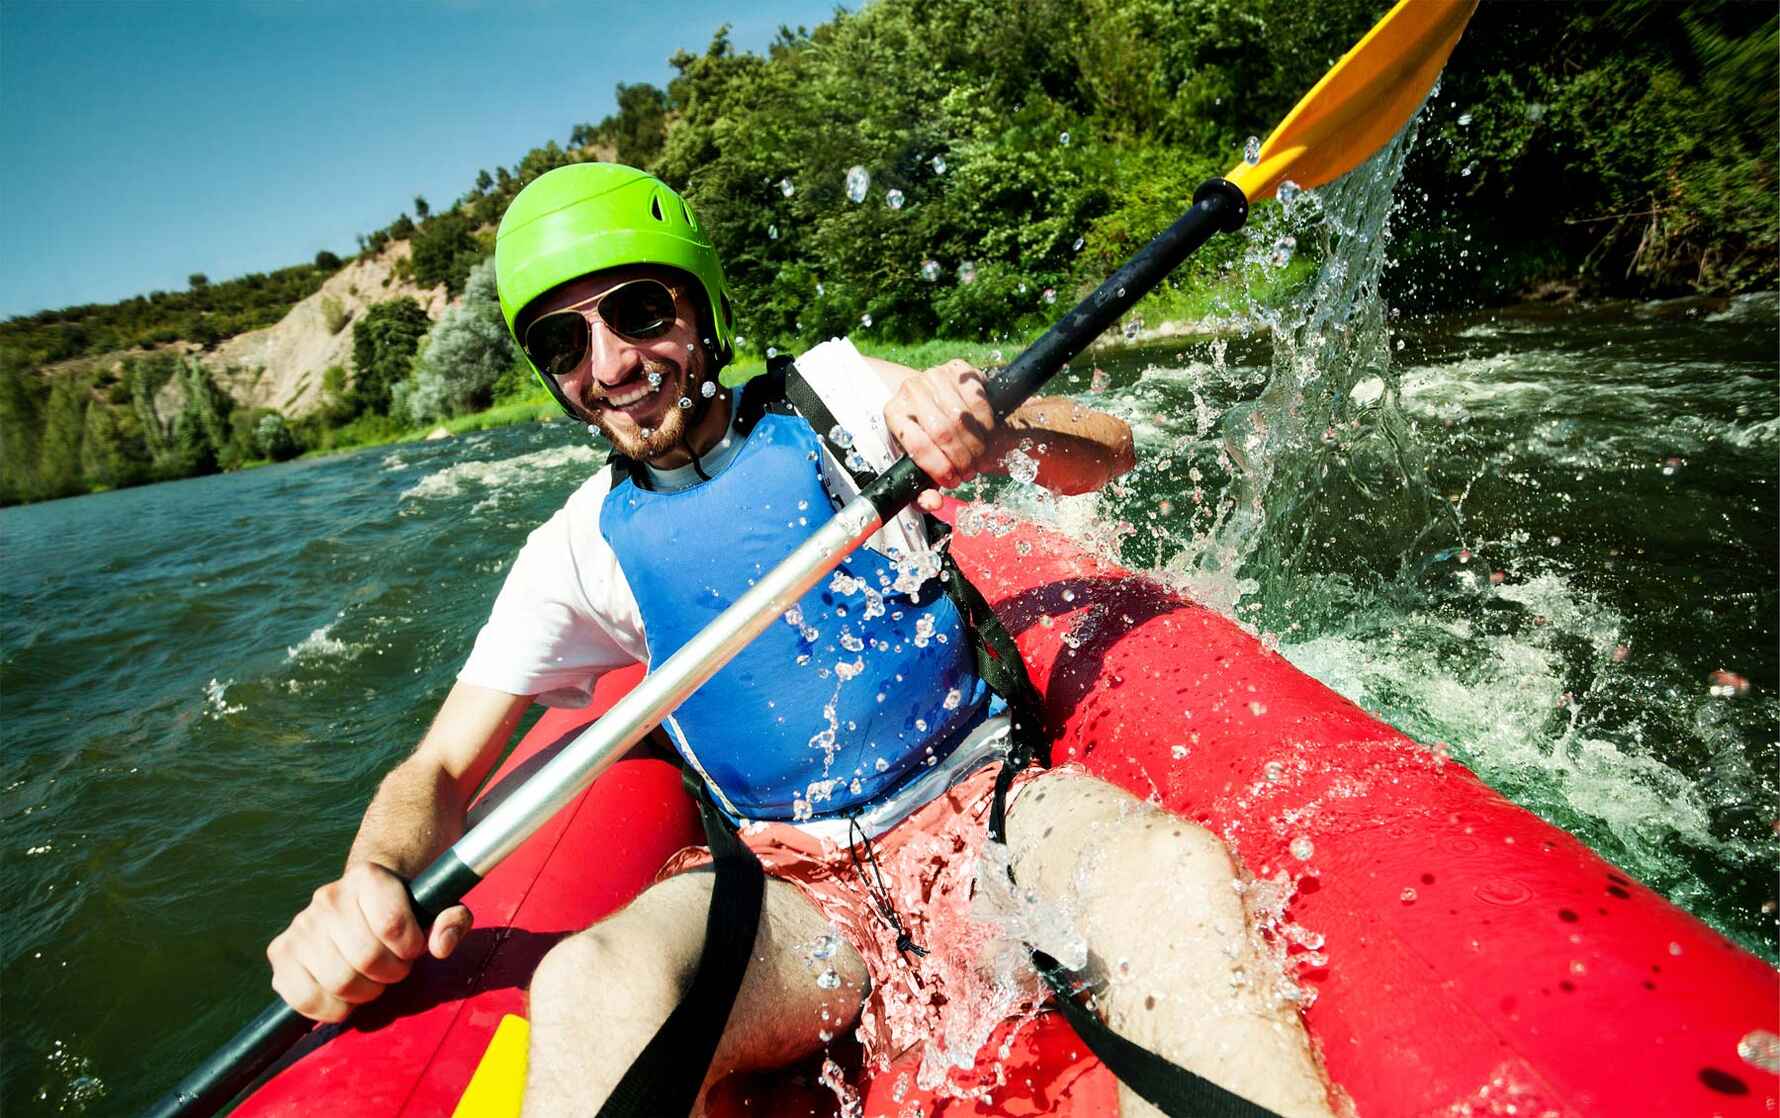 A person canoe rafting